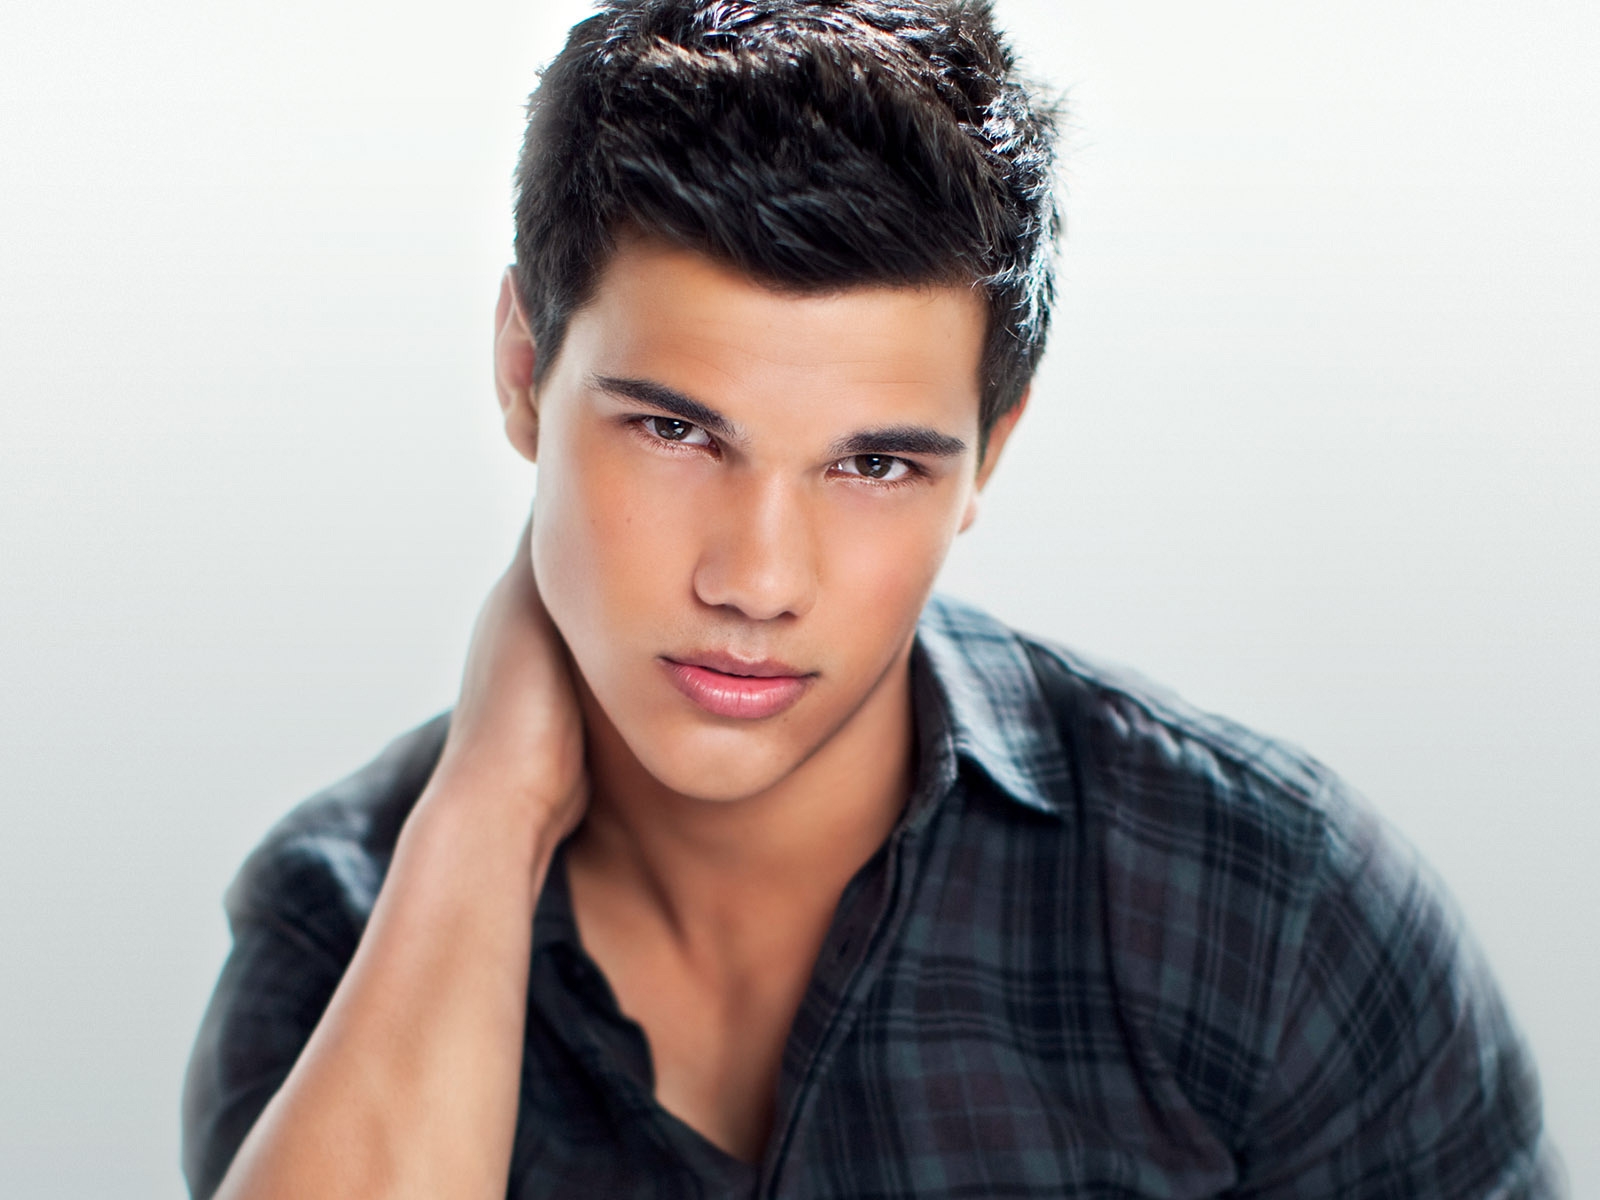 Taylor Lautner Actor for 1600 x 1200 resolution